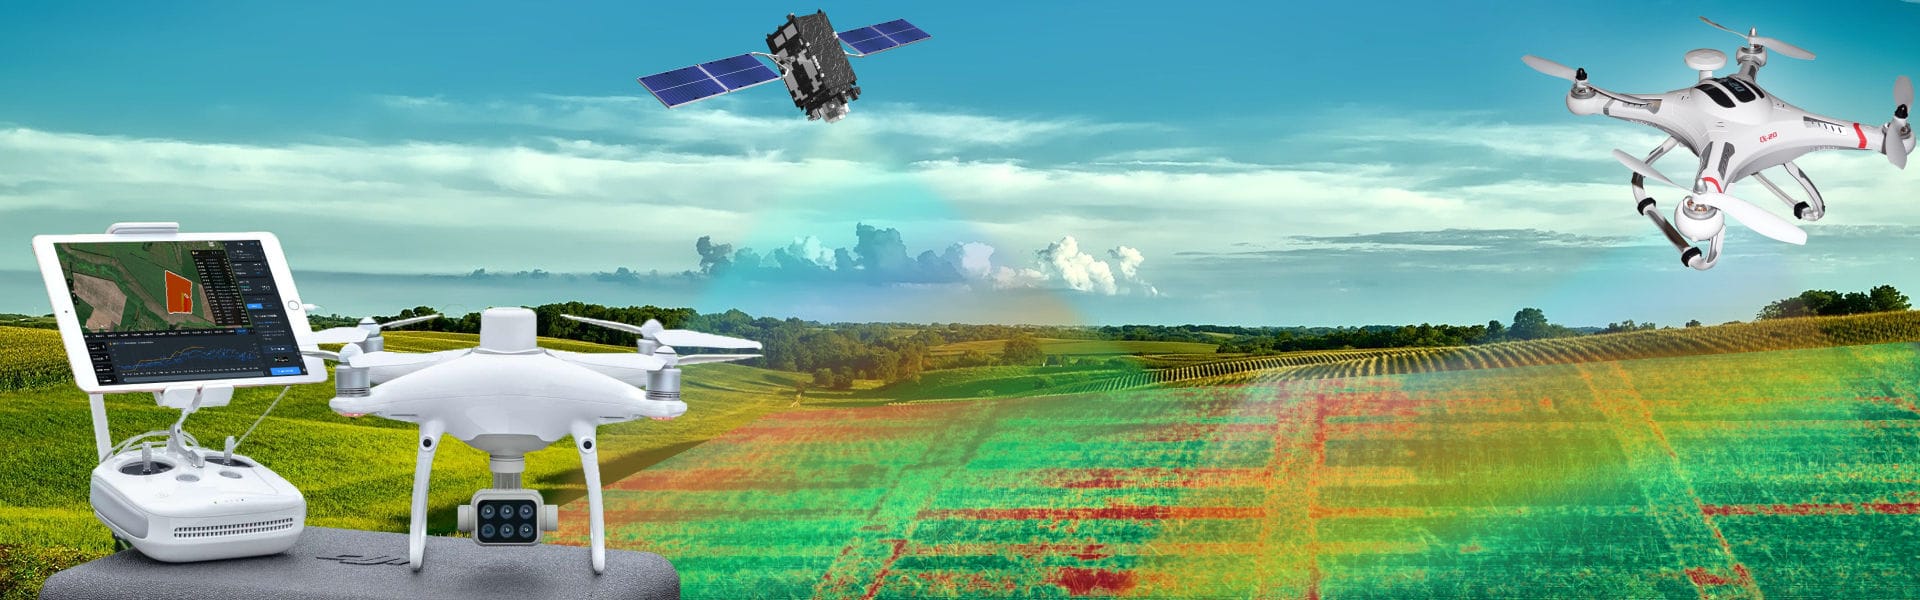 Satellites Vs. For Agri-Business: And Comparison